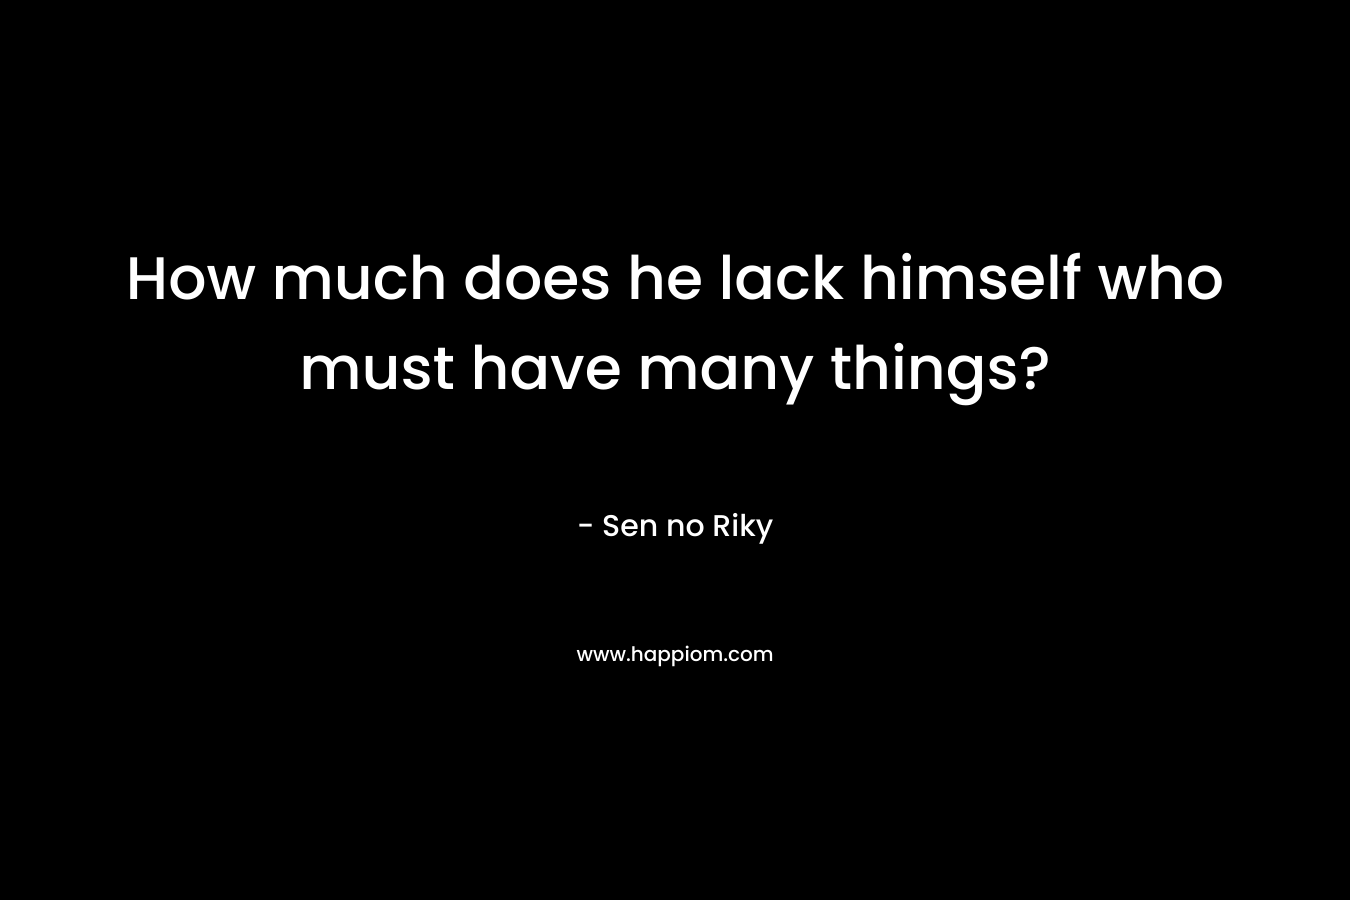 How much does he lack himself who must have many things? – Sen no Riky